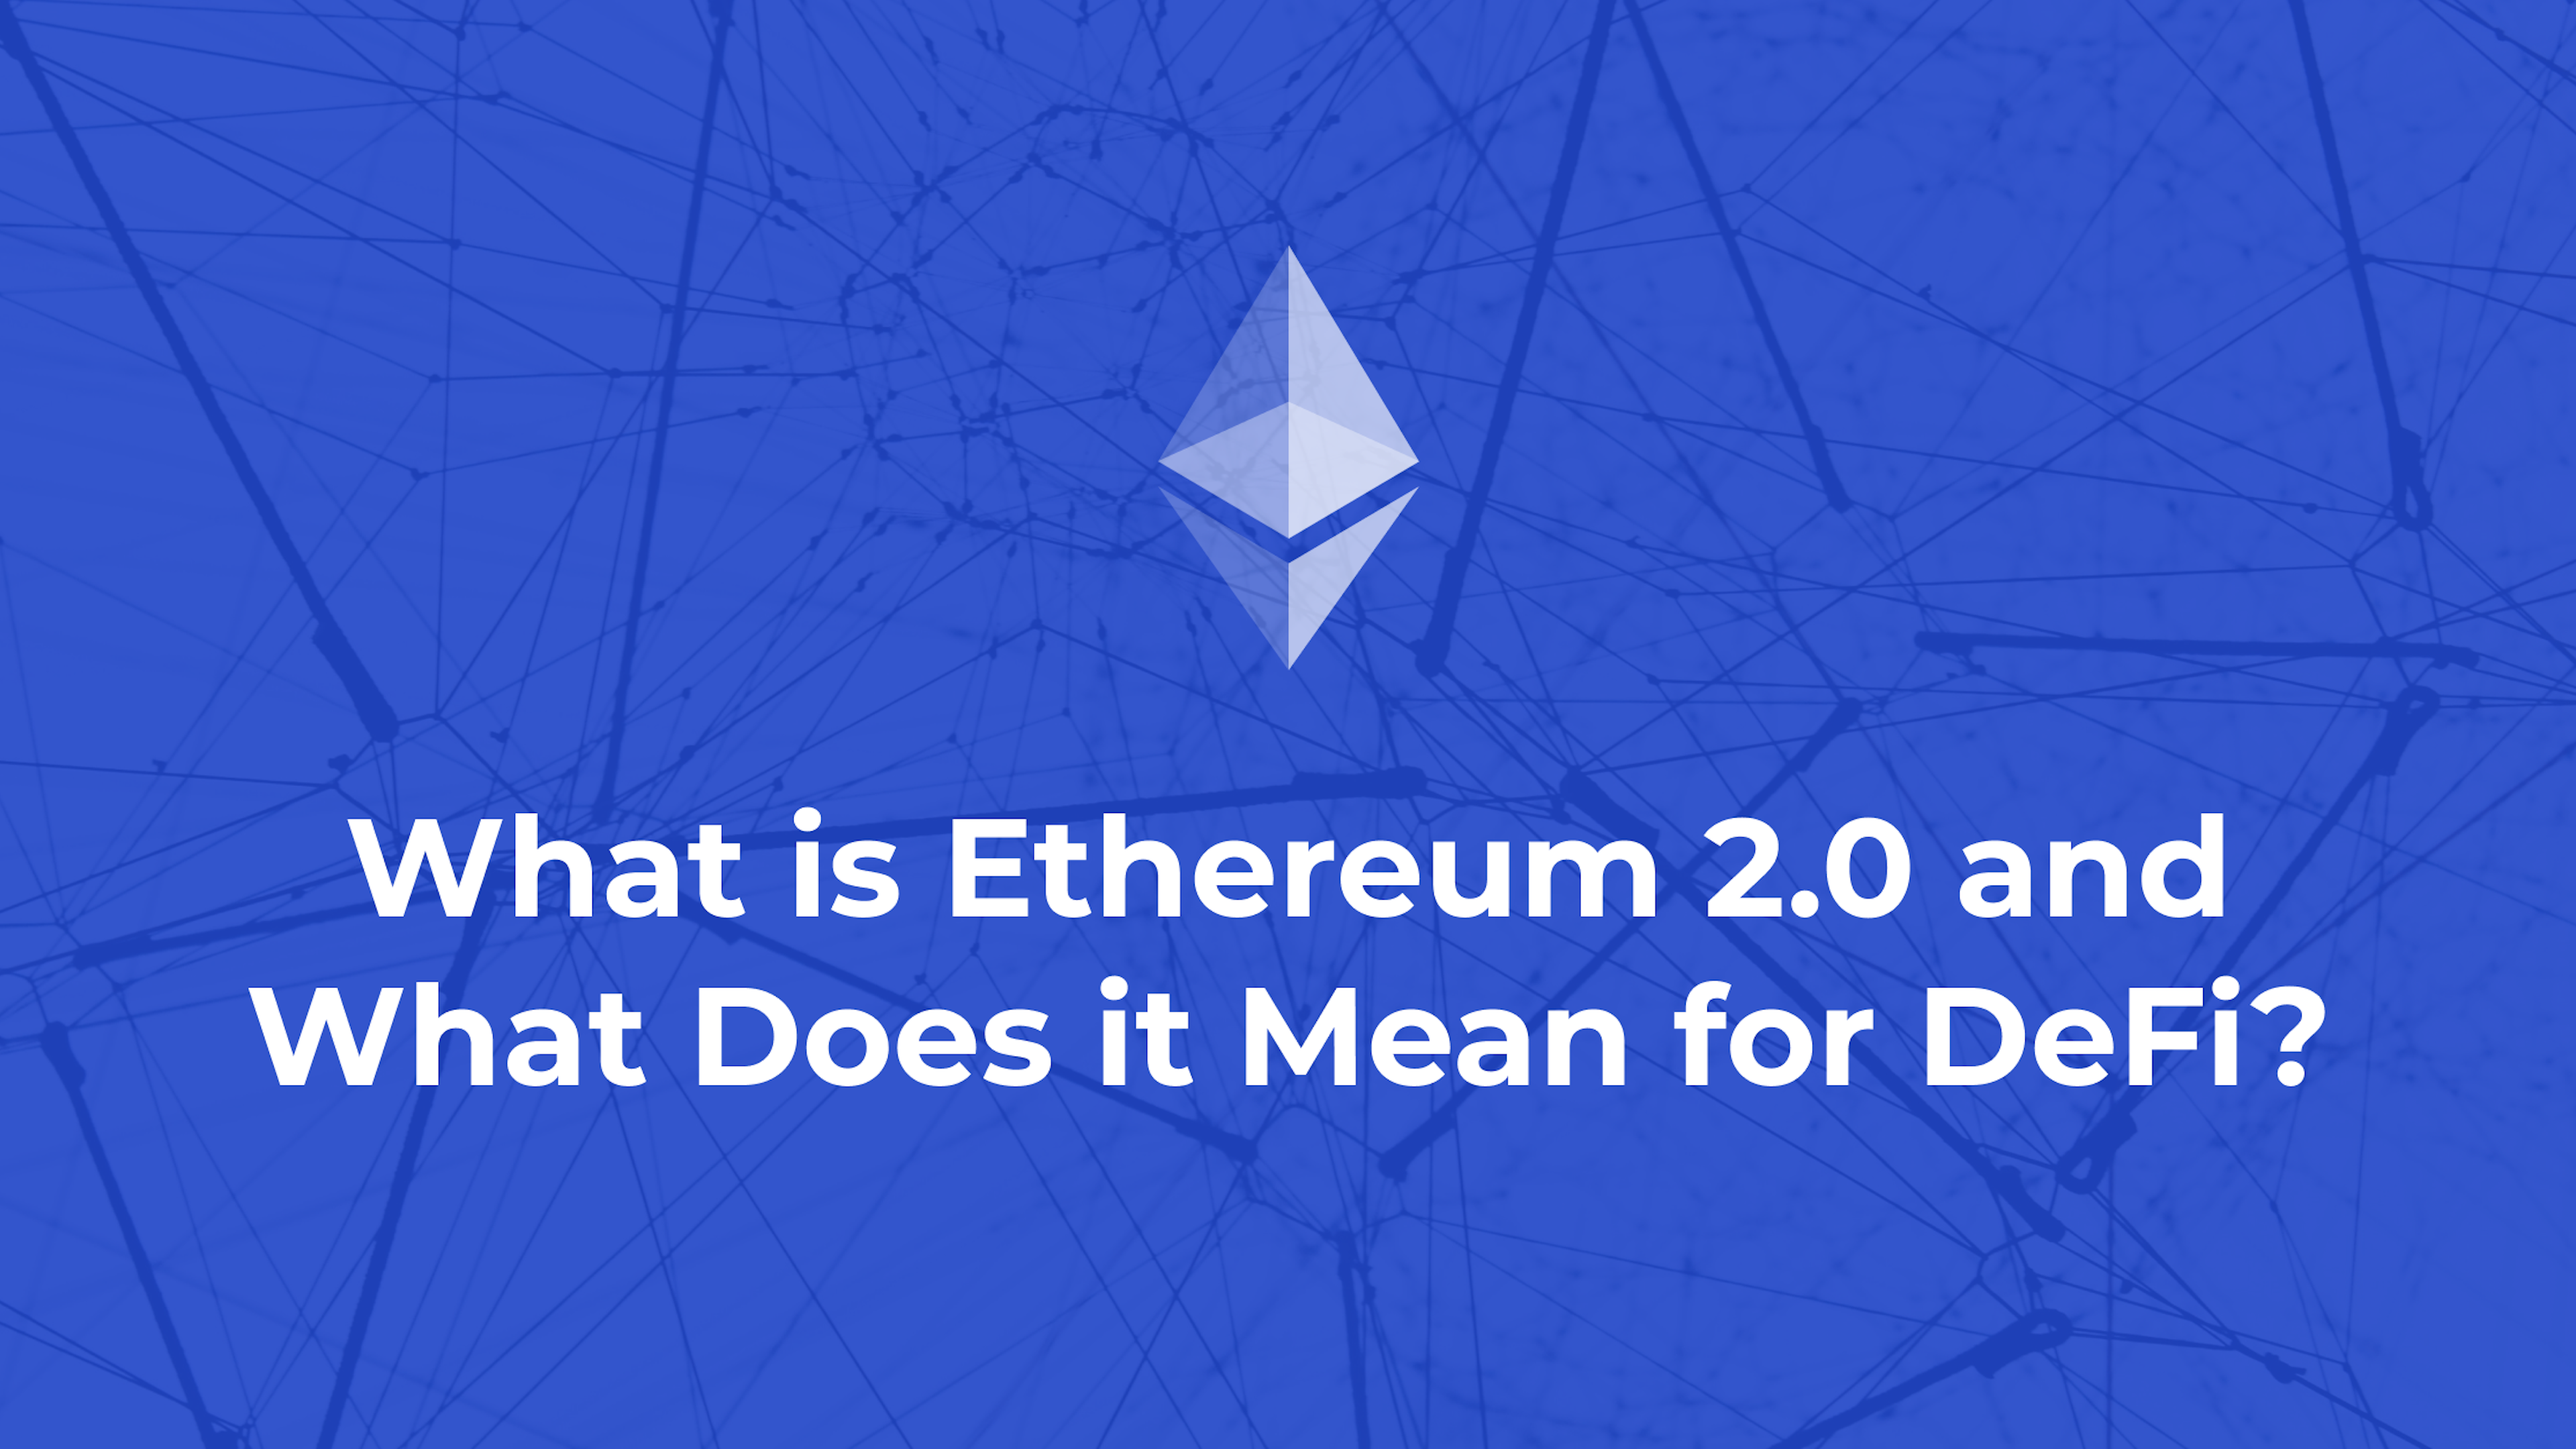 What is Ethereum 2.0 and What Does it Mean for DeFi?